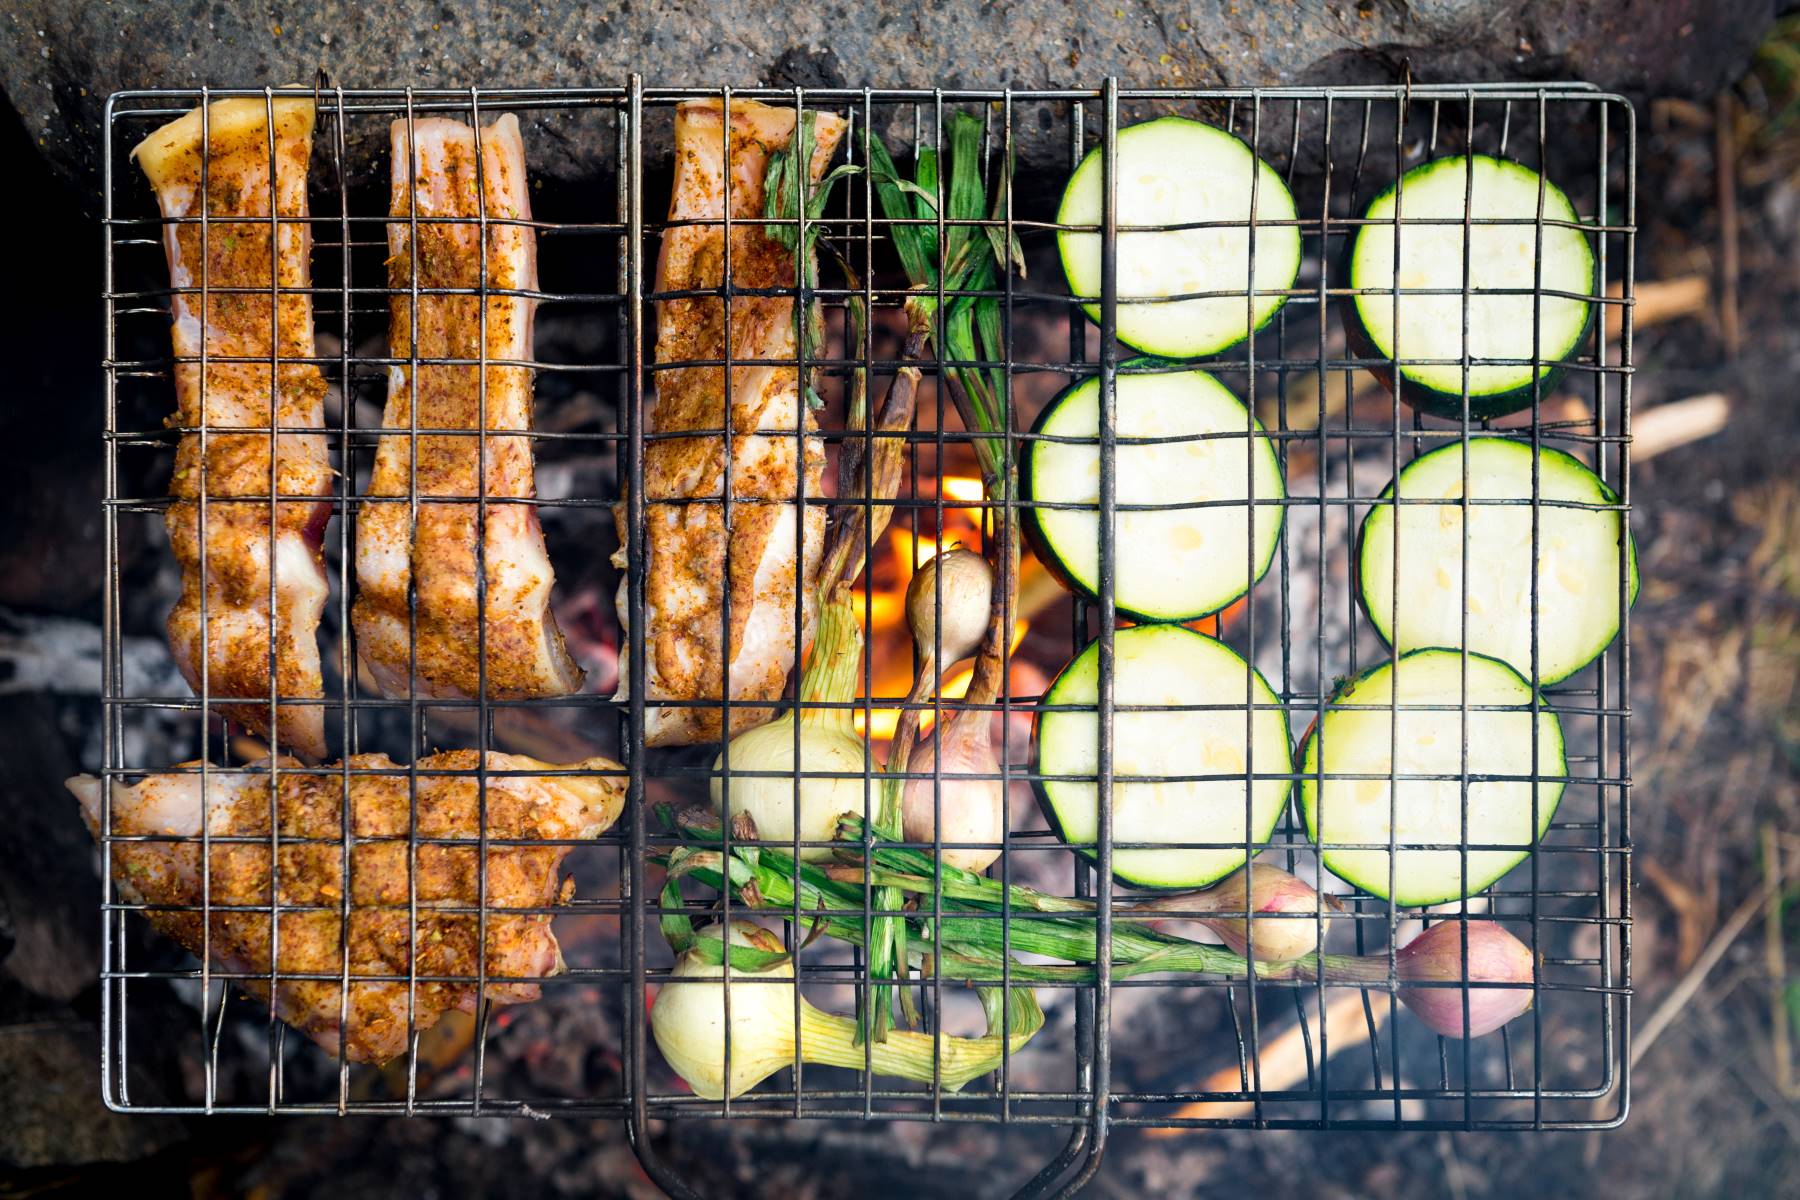 Campfire grilling basket with meat and veggies cooking over an open fire